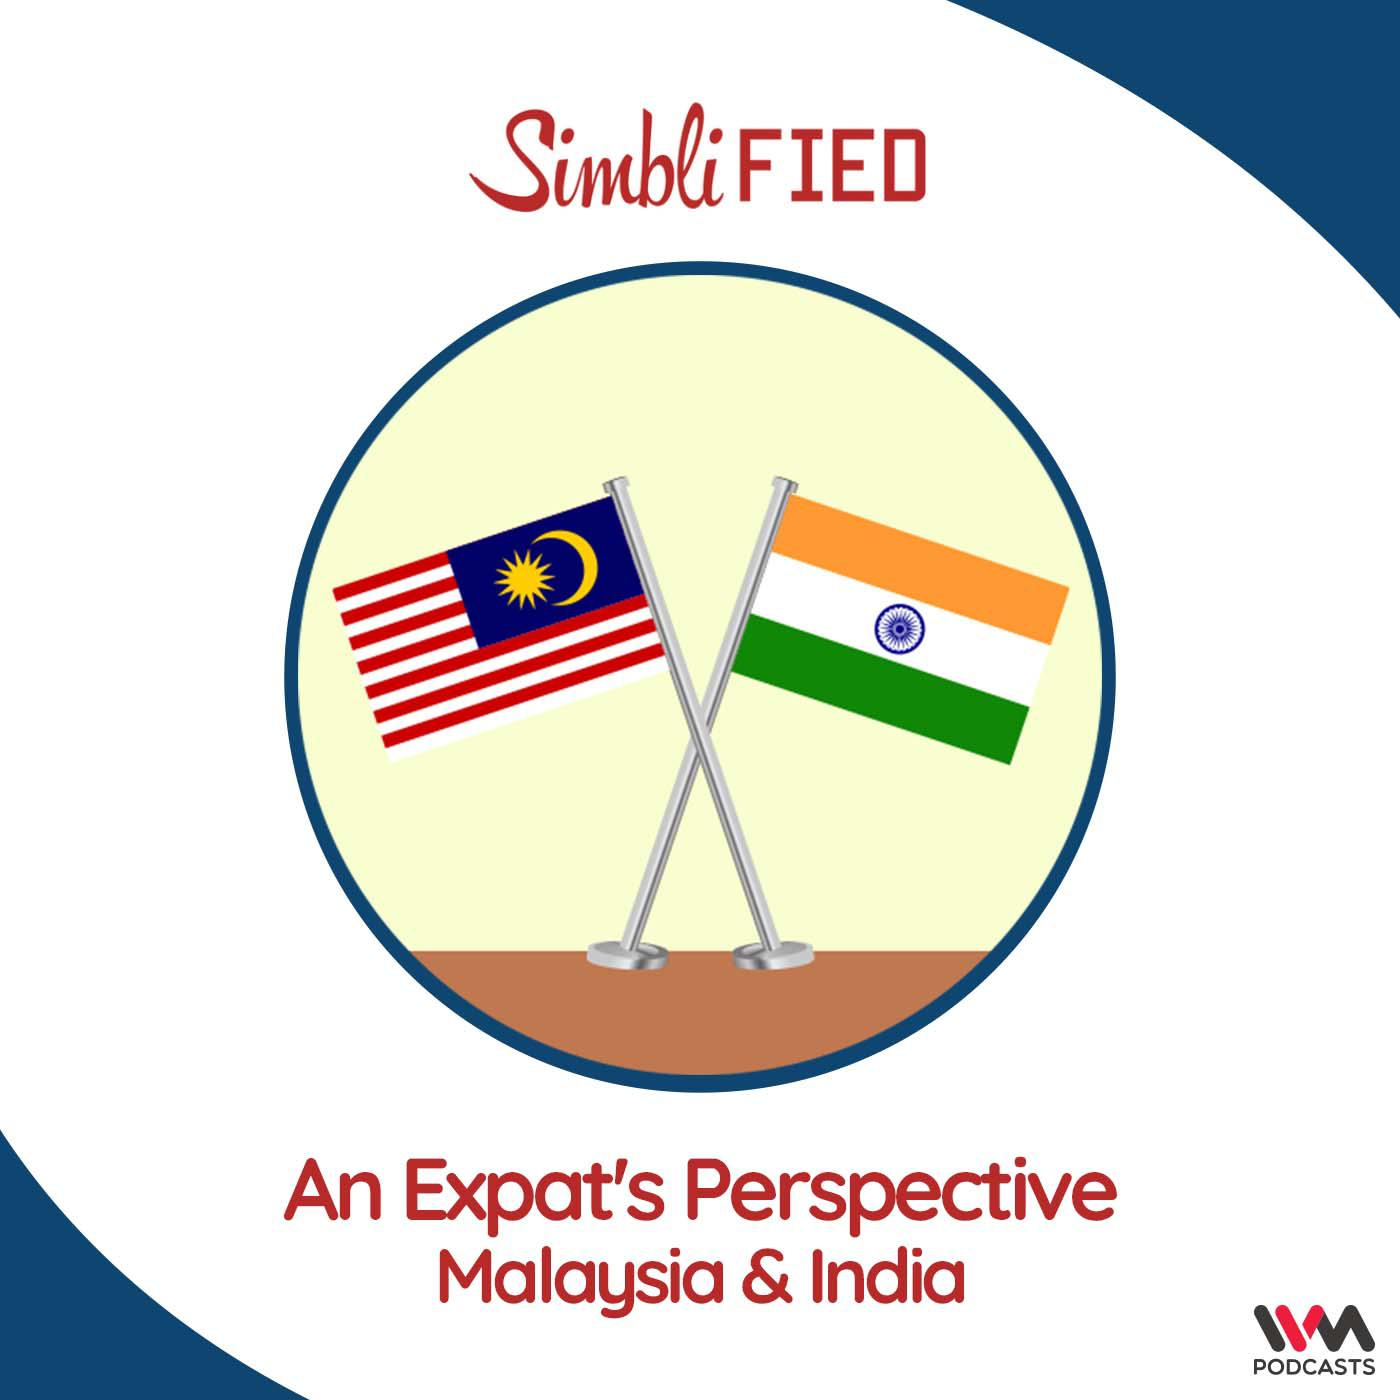 An Expat's Perspective: Malaysia & India